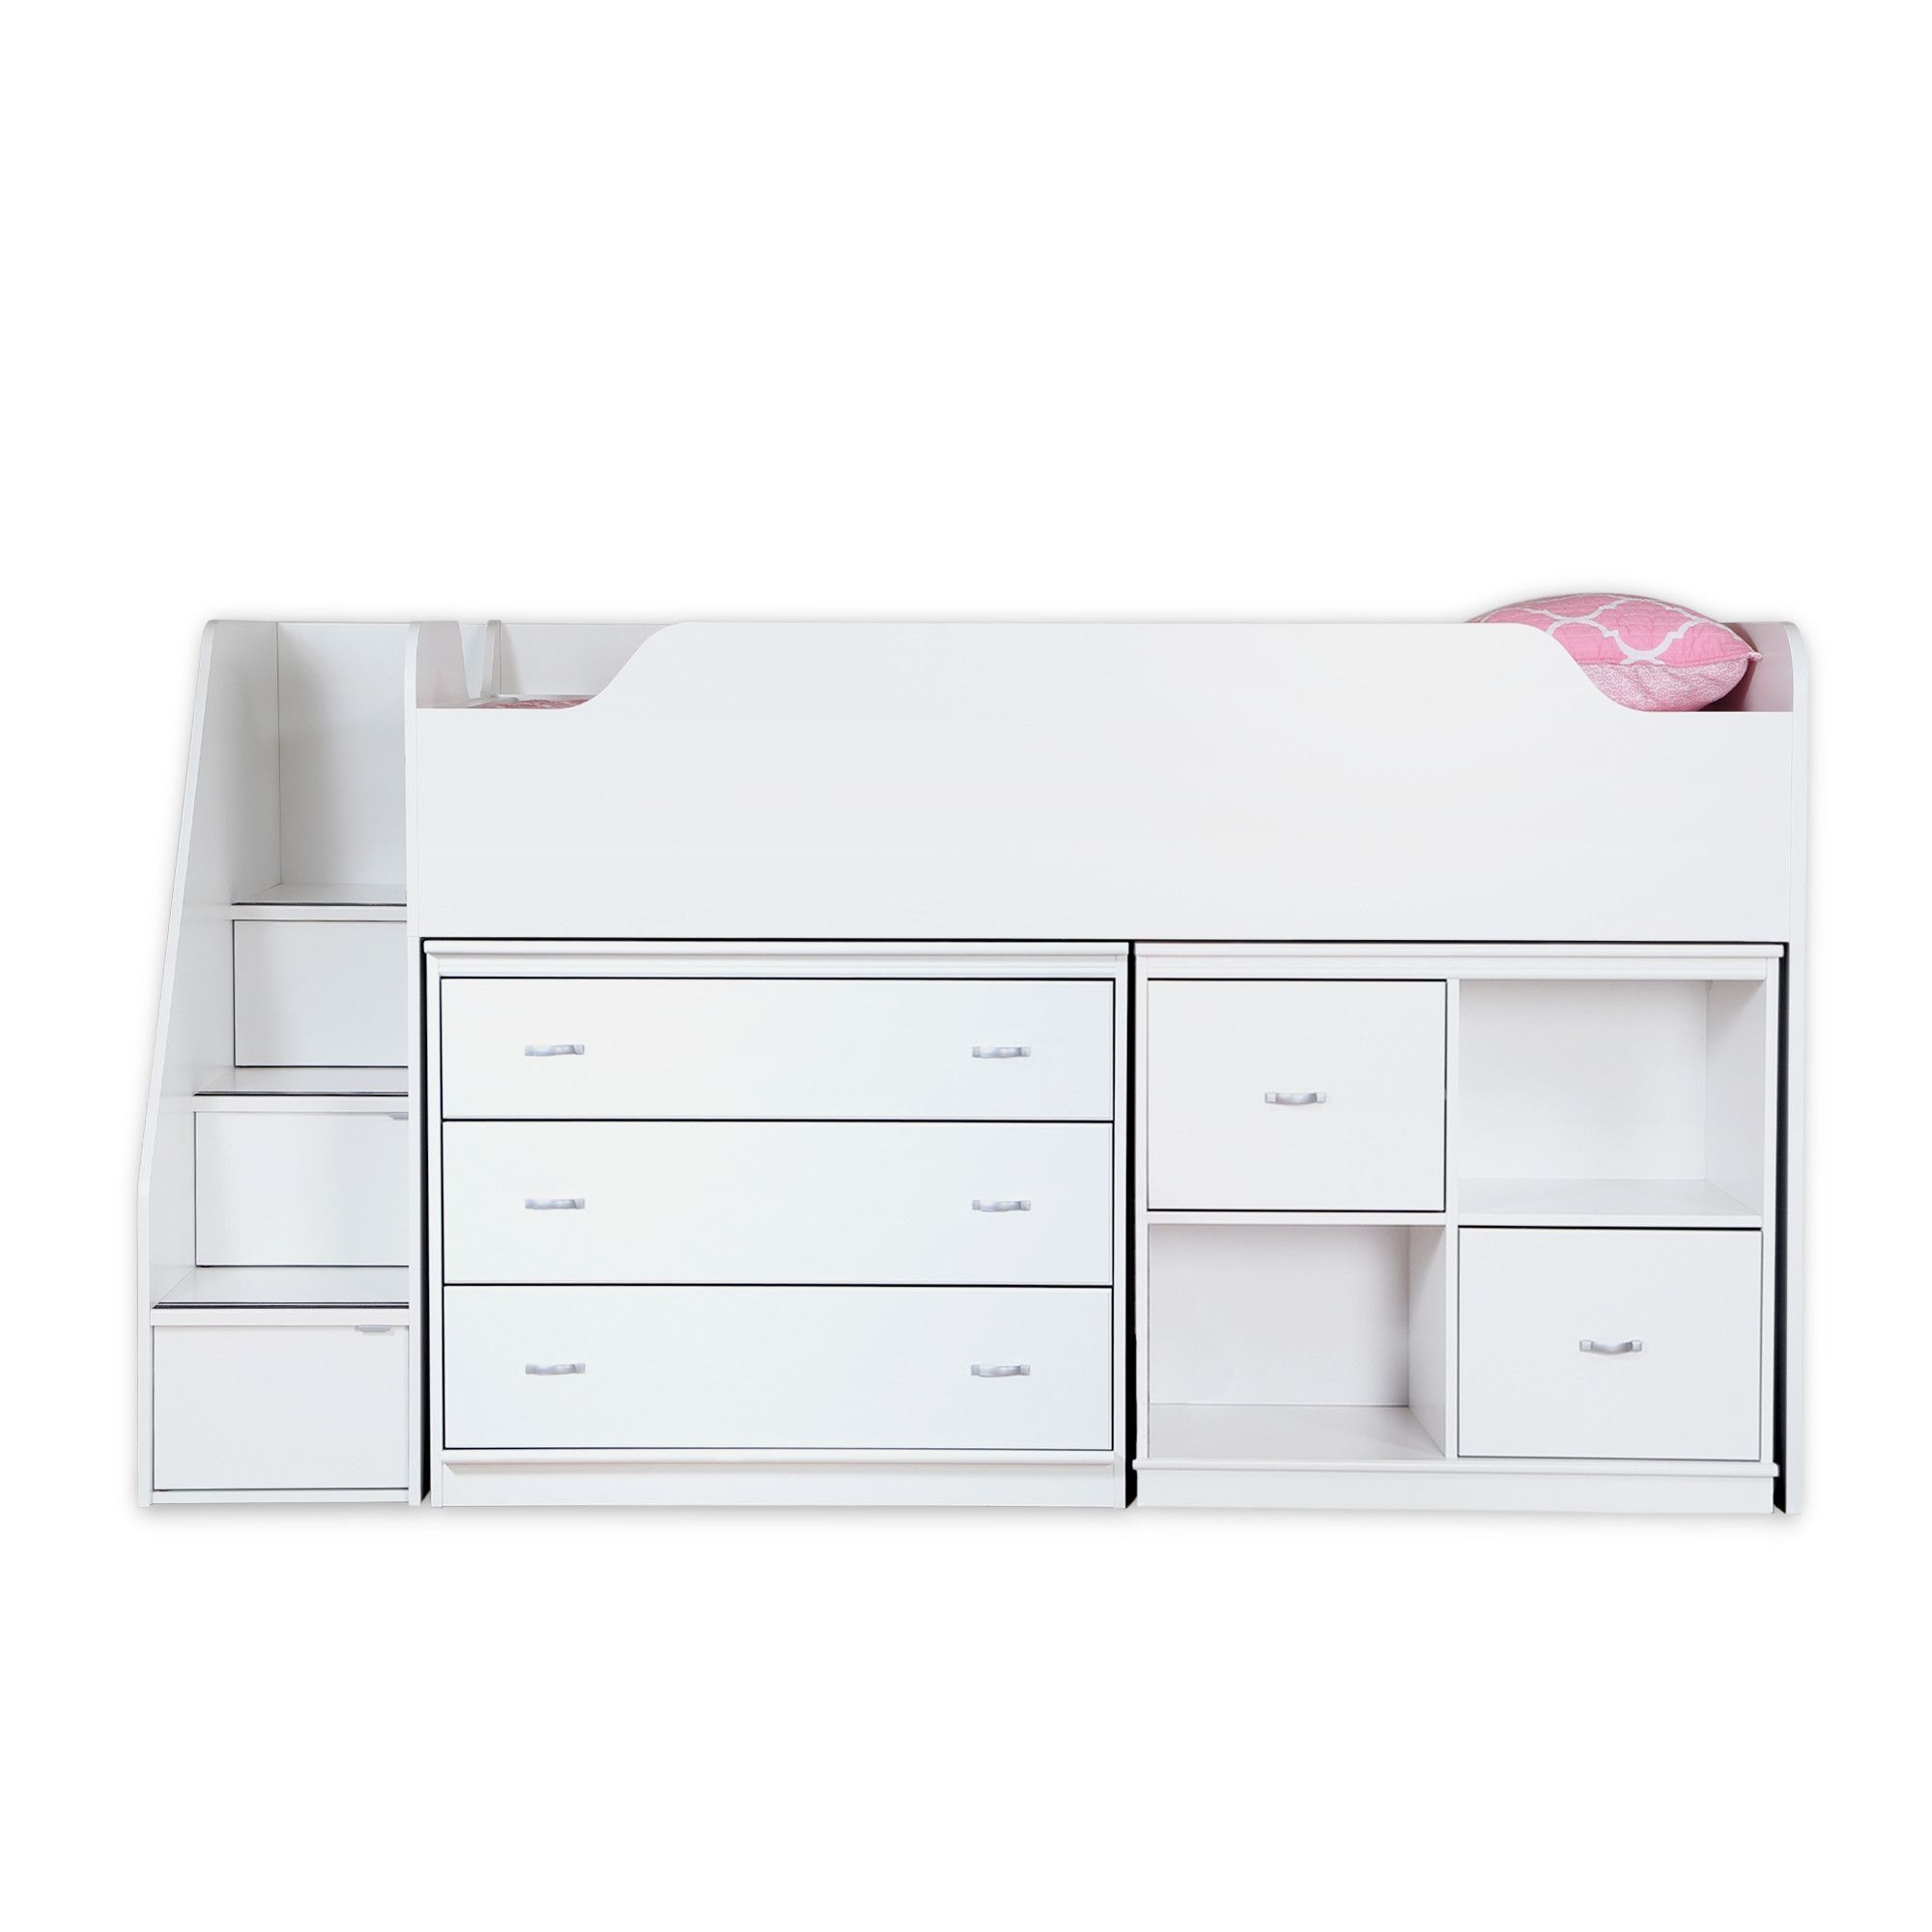 South shore mobby twin loft bed with trundle and storage